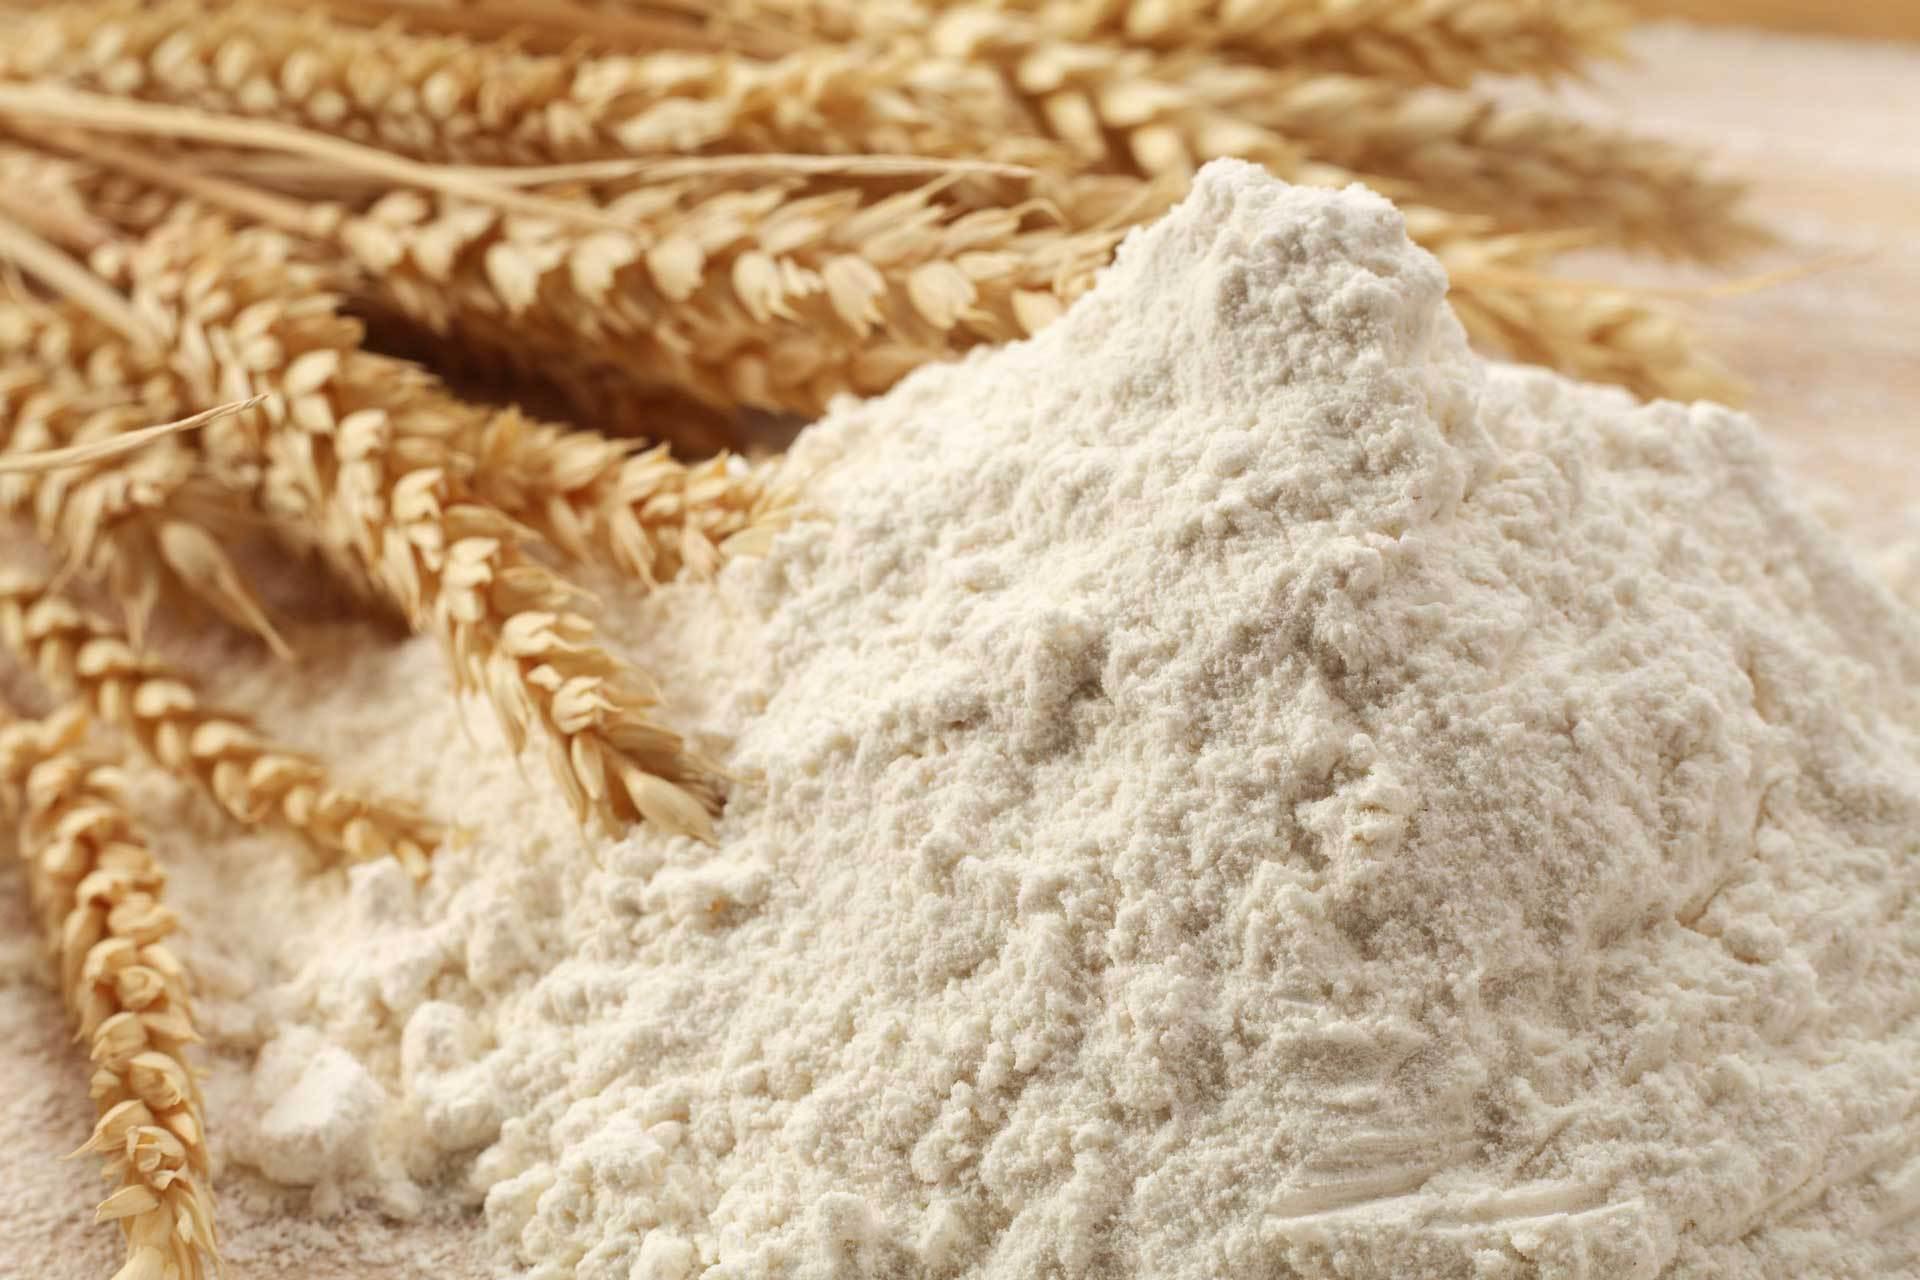 Uzbek company's flour production up in 1Q2020 compared to 1Q2019